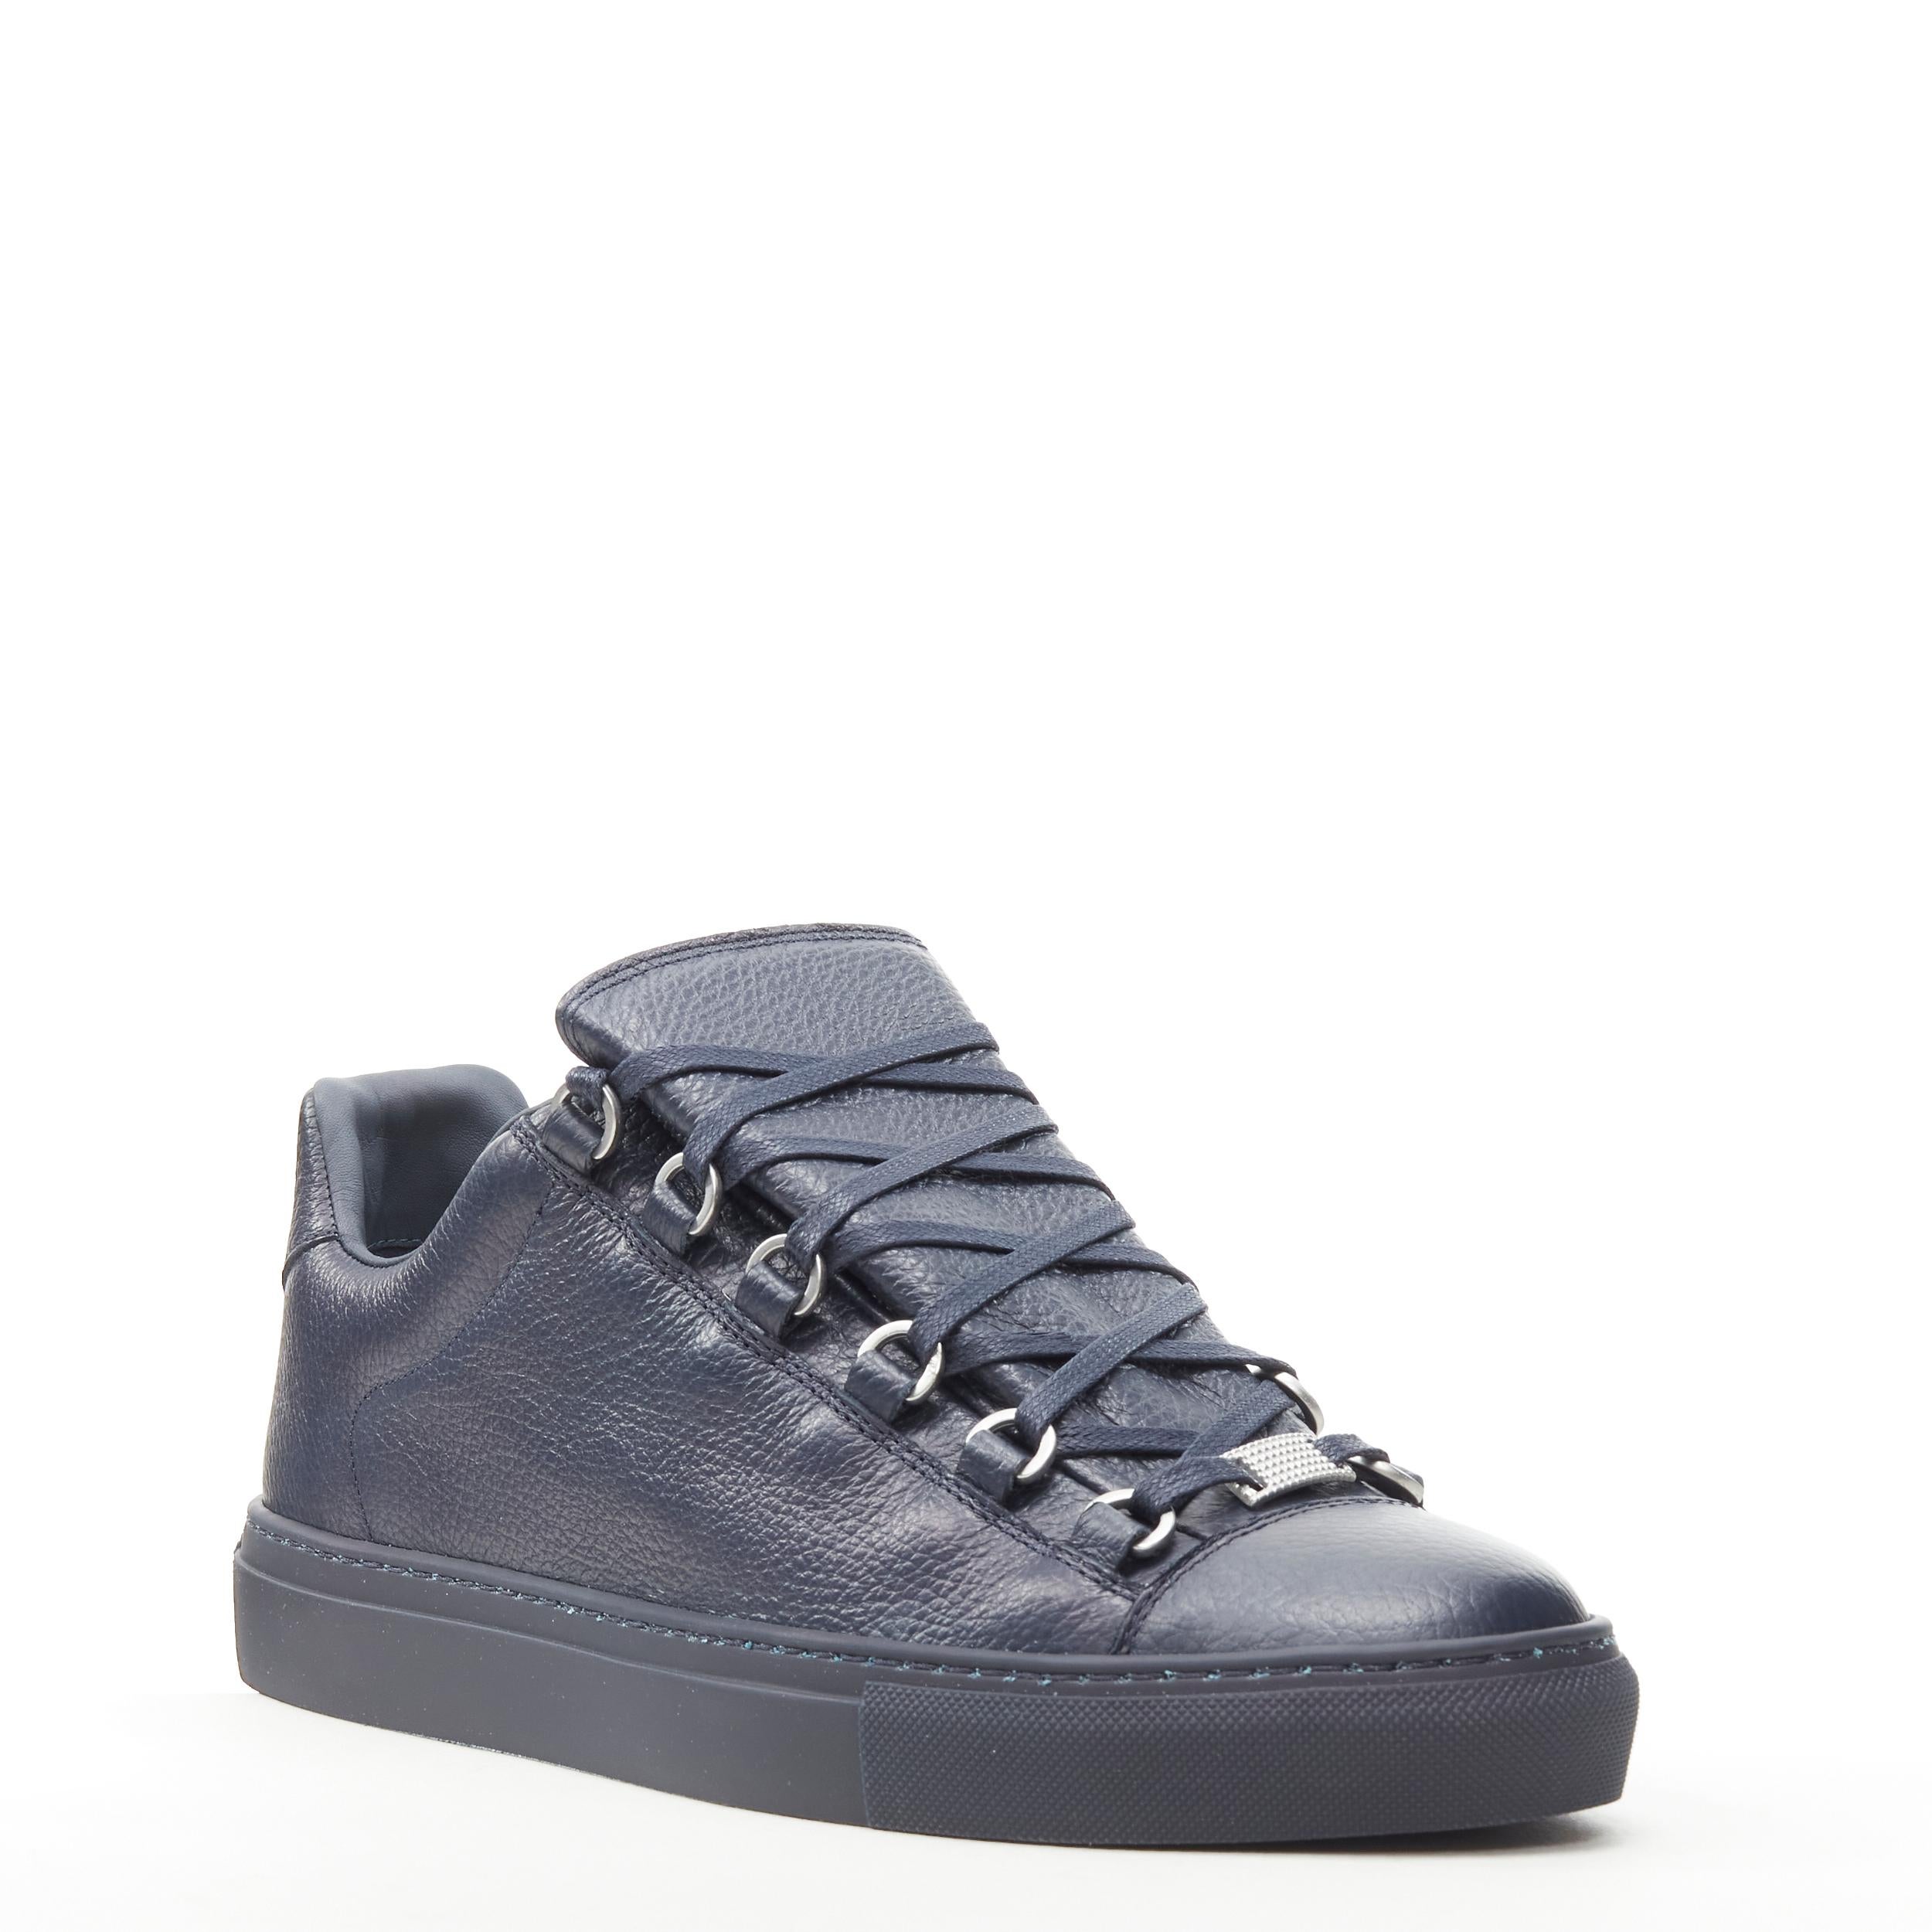 new BALENCIAGA DEMNA Arena navy blue grained leather low top sneakers EU41 US8 
Reference: TGAS/C00435 
Brand: Balenciaga 
Designer: Demna 
Model: 565558 WA2NO 4013 
Material: Leather 
Color: Navy 
Pattern: Solid 
Closure: Lace 
Extra Detail: Navy